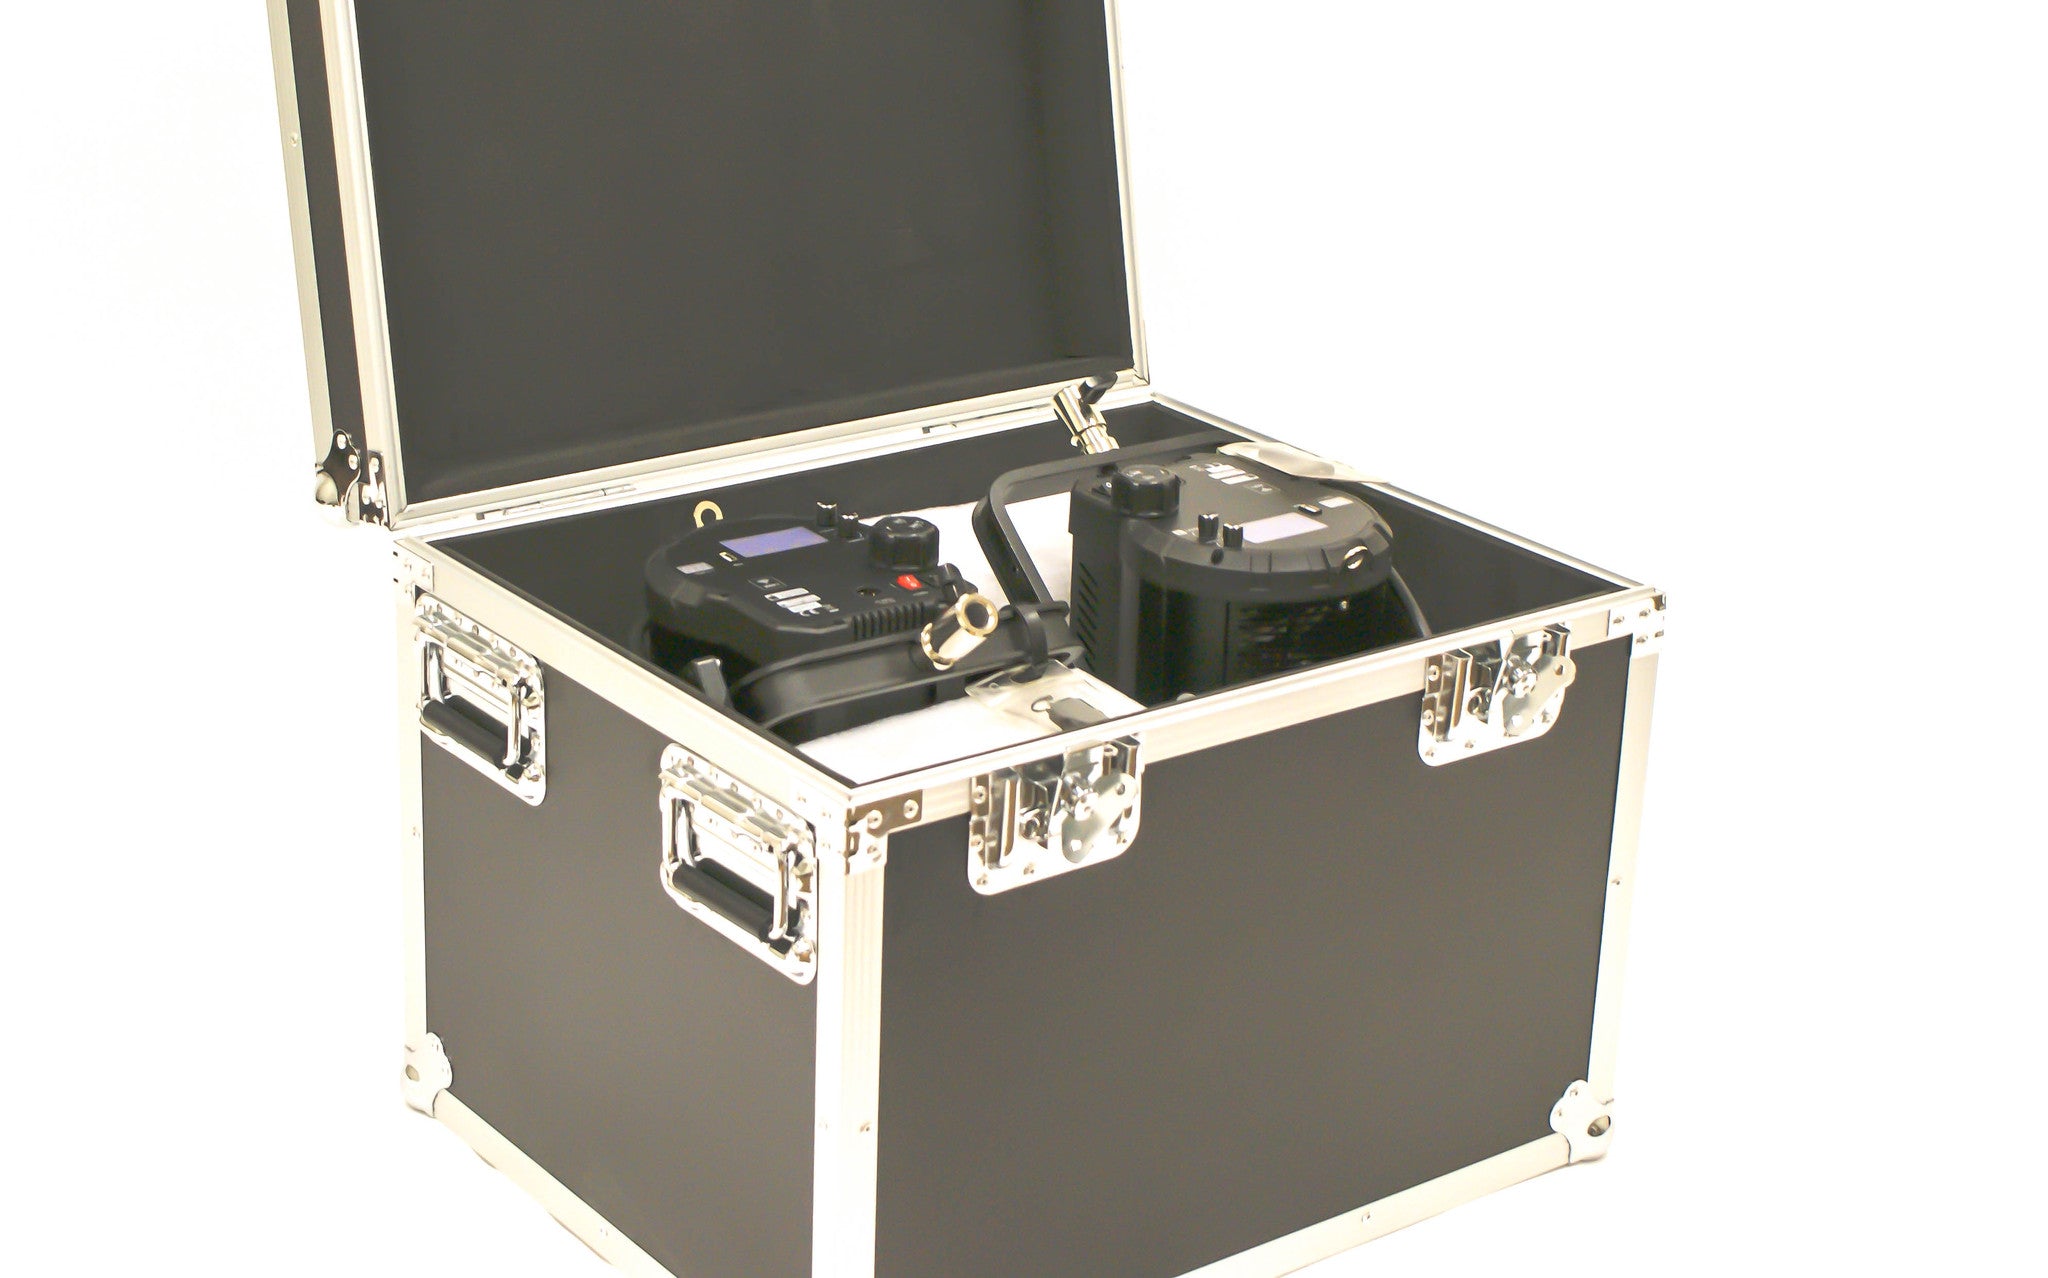 IT-AC165 - Aluminum Crushproof Case for 2 x F-165 Light Cannons